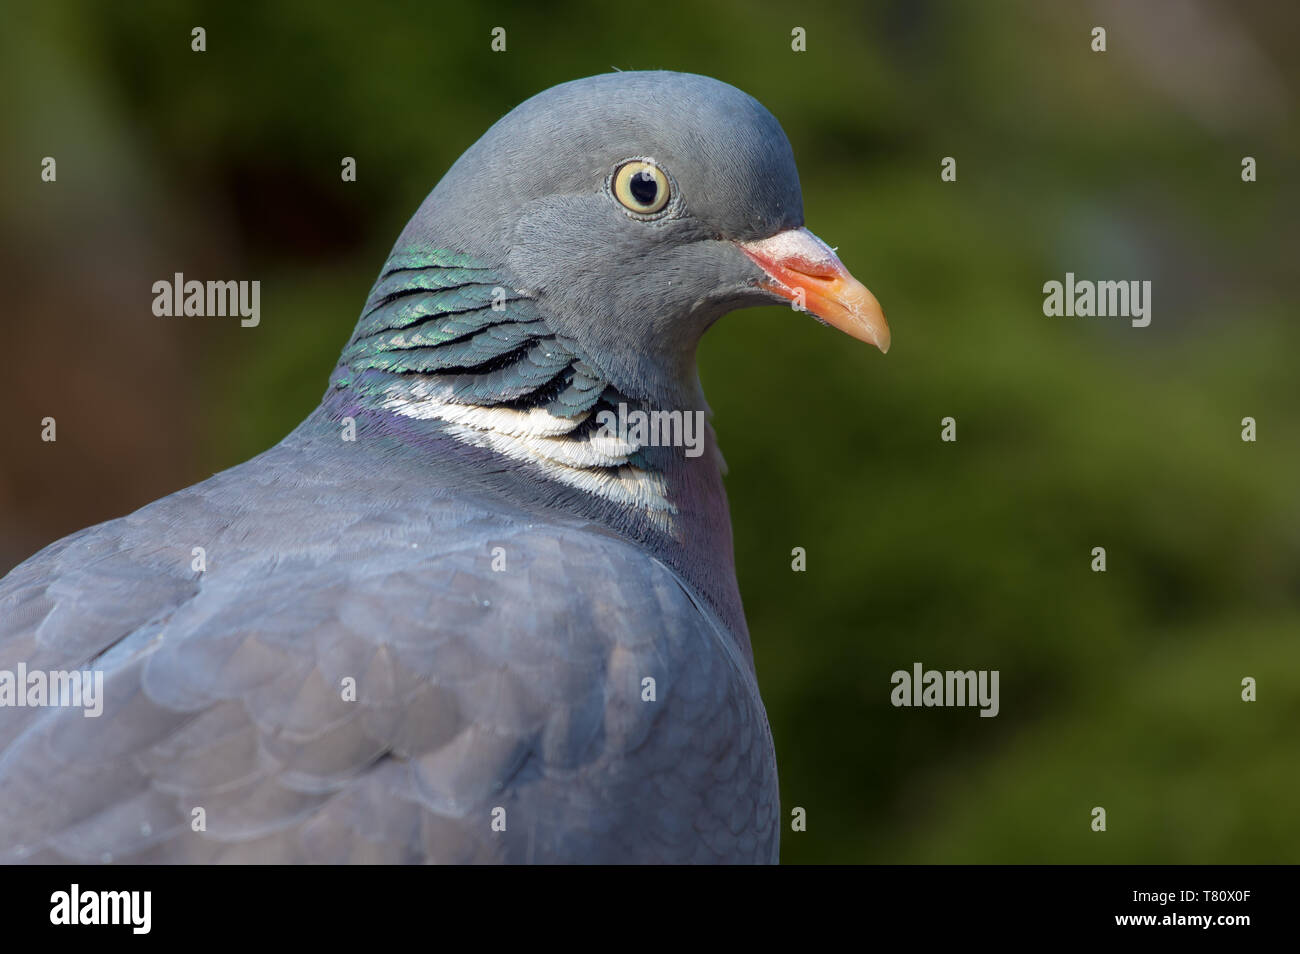 Common wood pigeon very close portrait with detailed face and eyes Stock Photo